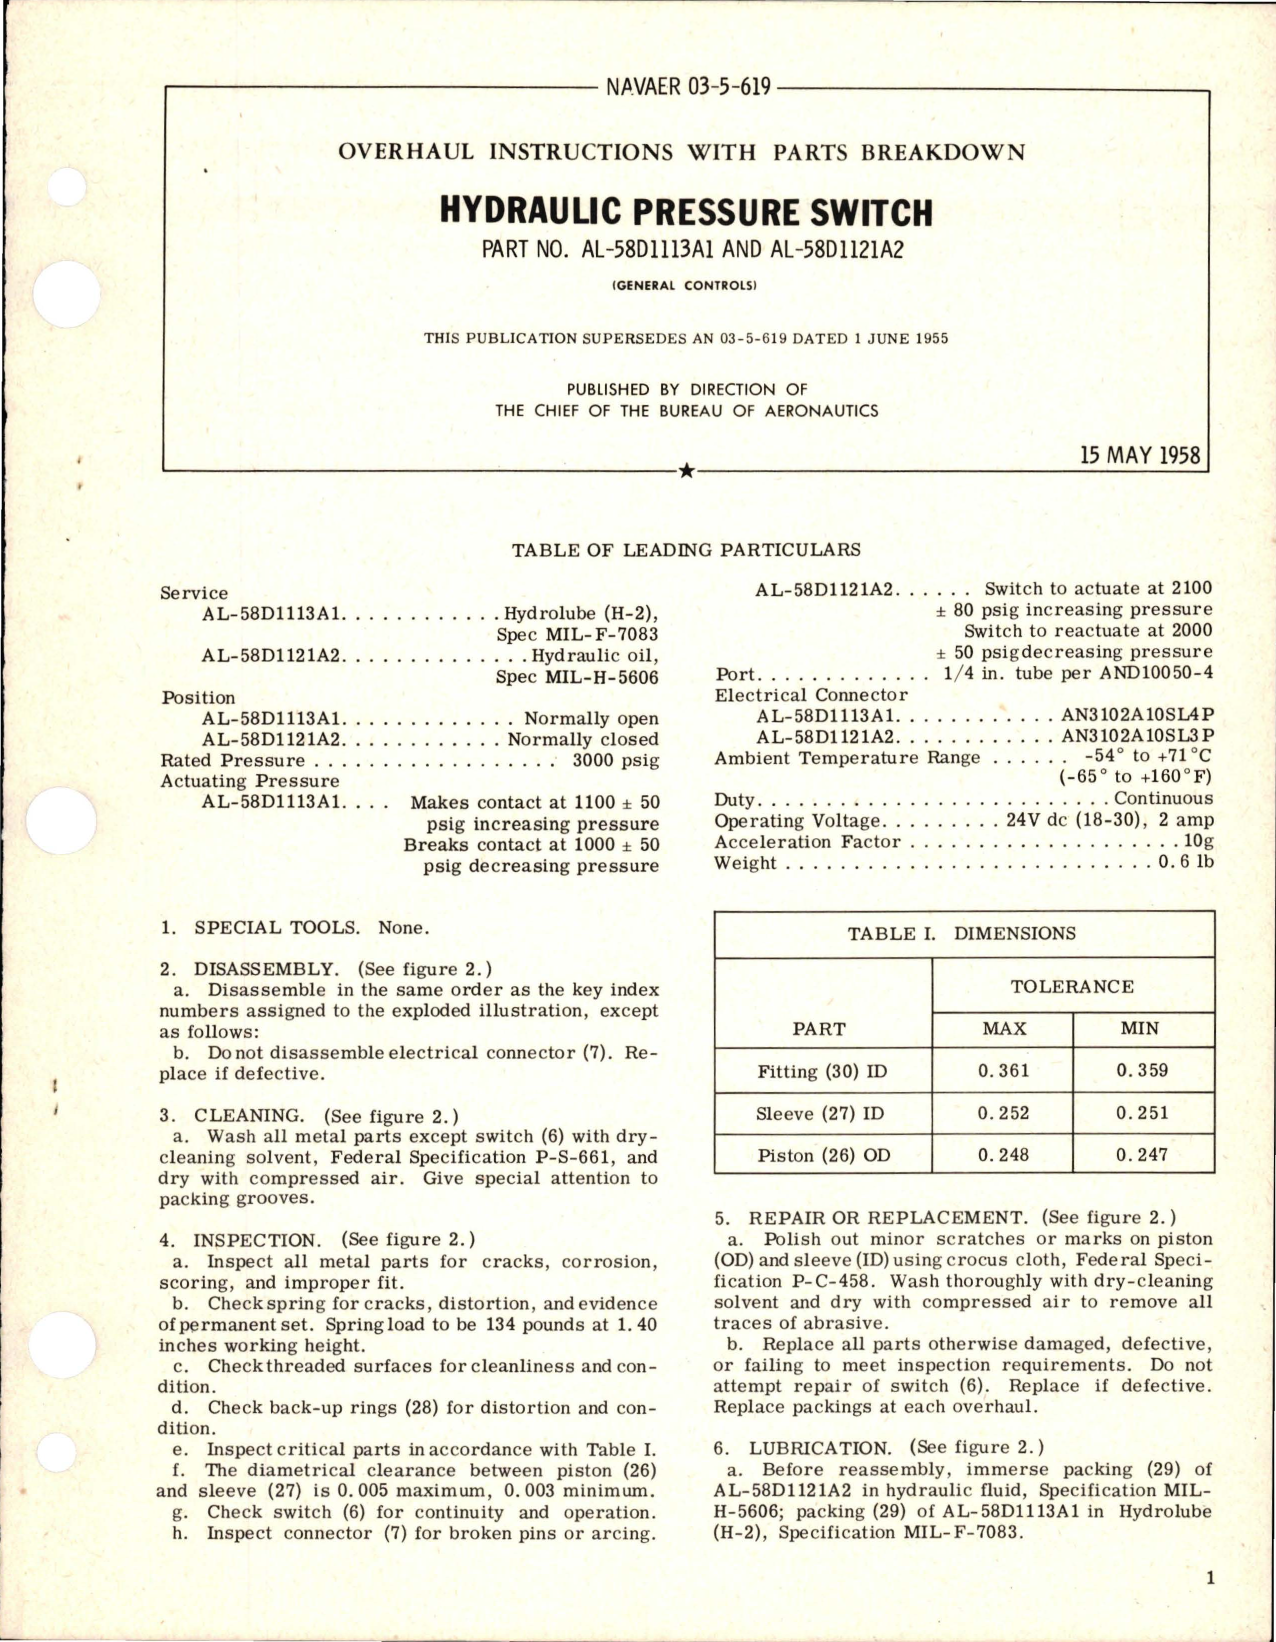 Sample page 1 from AirCorps Library document: Overhaul Instructions with Parts Breakdown for Hydraulic Pressure Switch - Parts AL-58D1113A1 and AL-58D1121A2